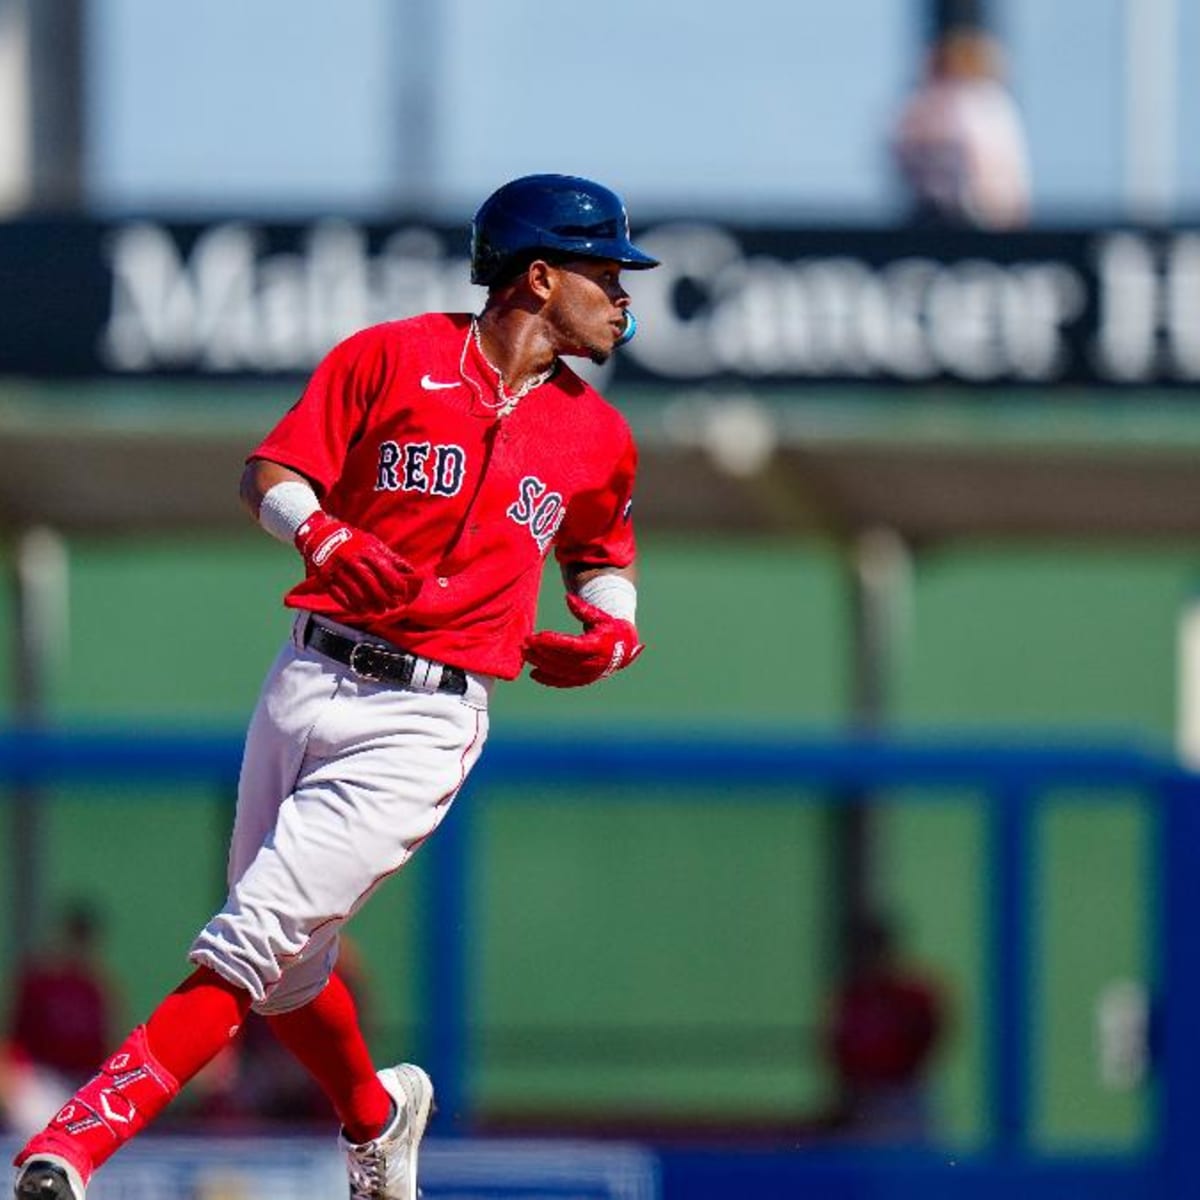 Ceddanne Rafaela steals six bases in Red Sox minor league game